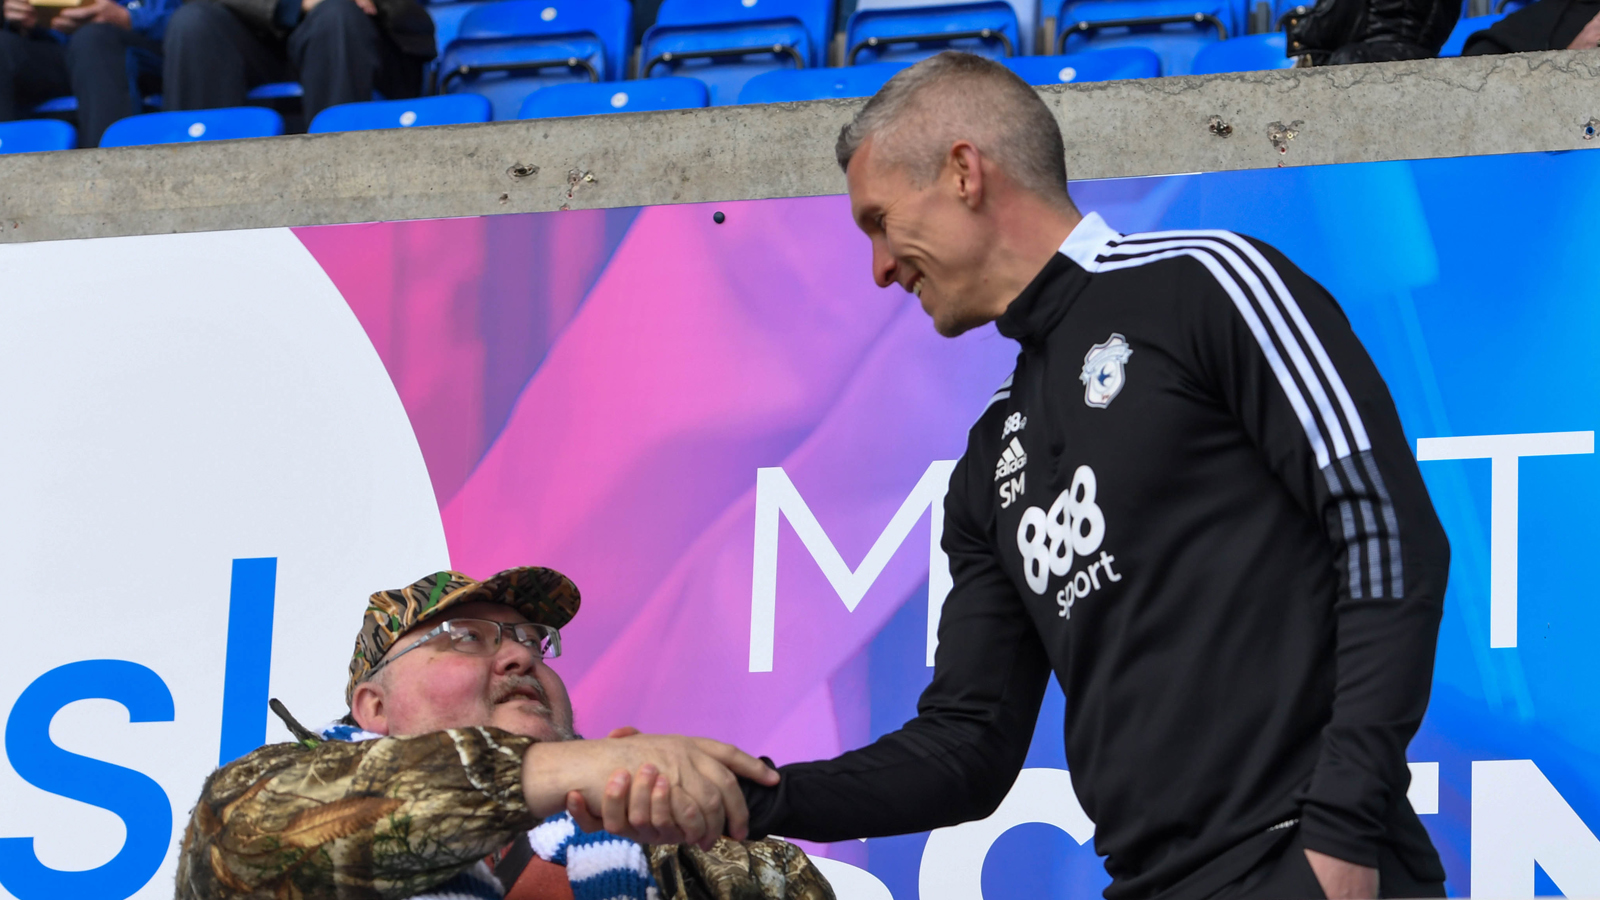 Cardiff City Disabled Supporters Association